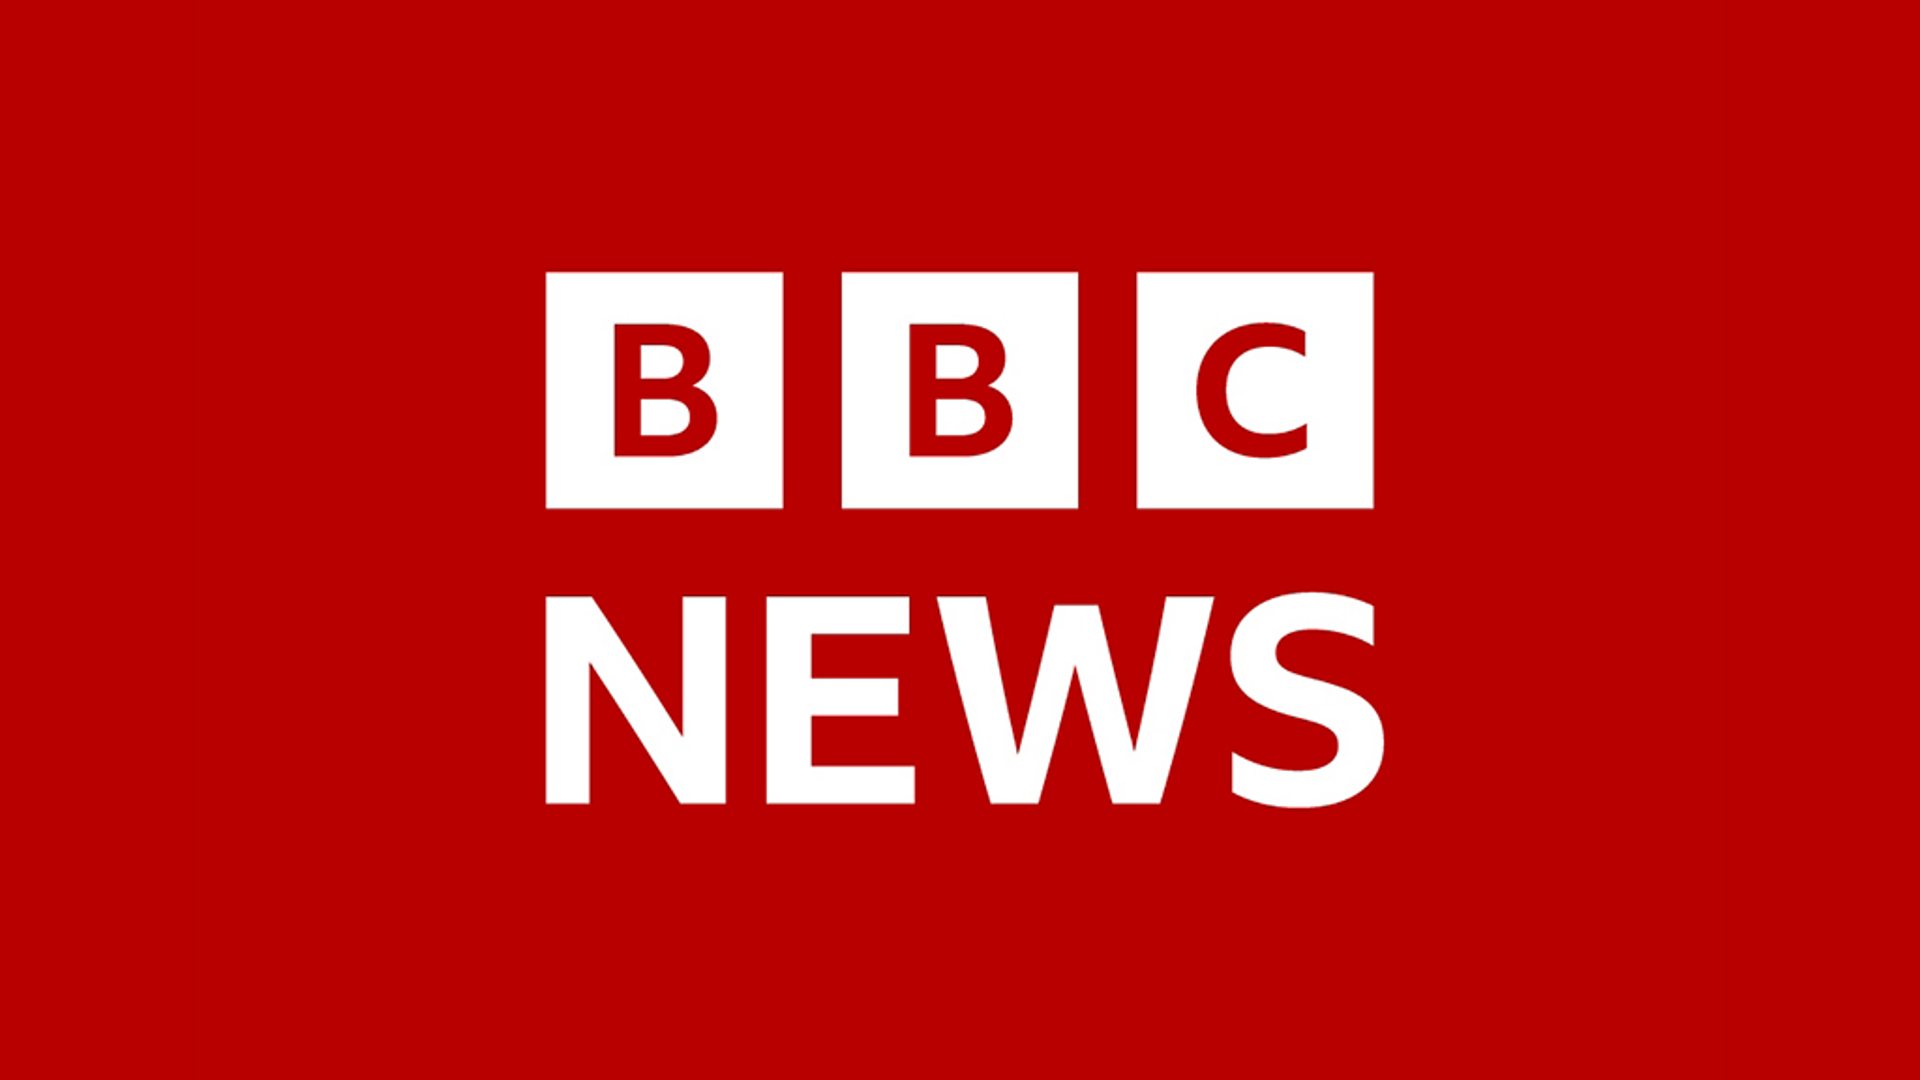 Changes in BBC News